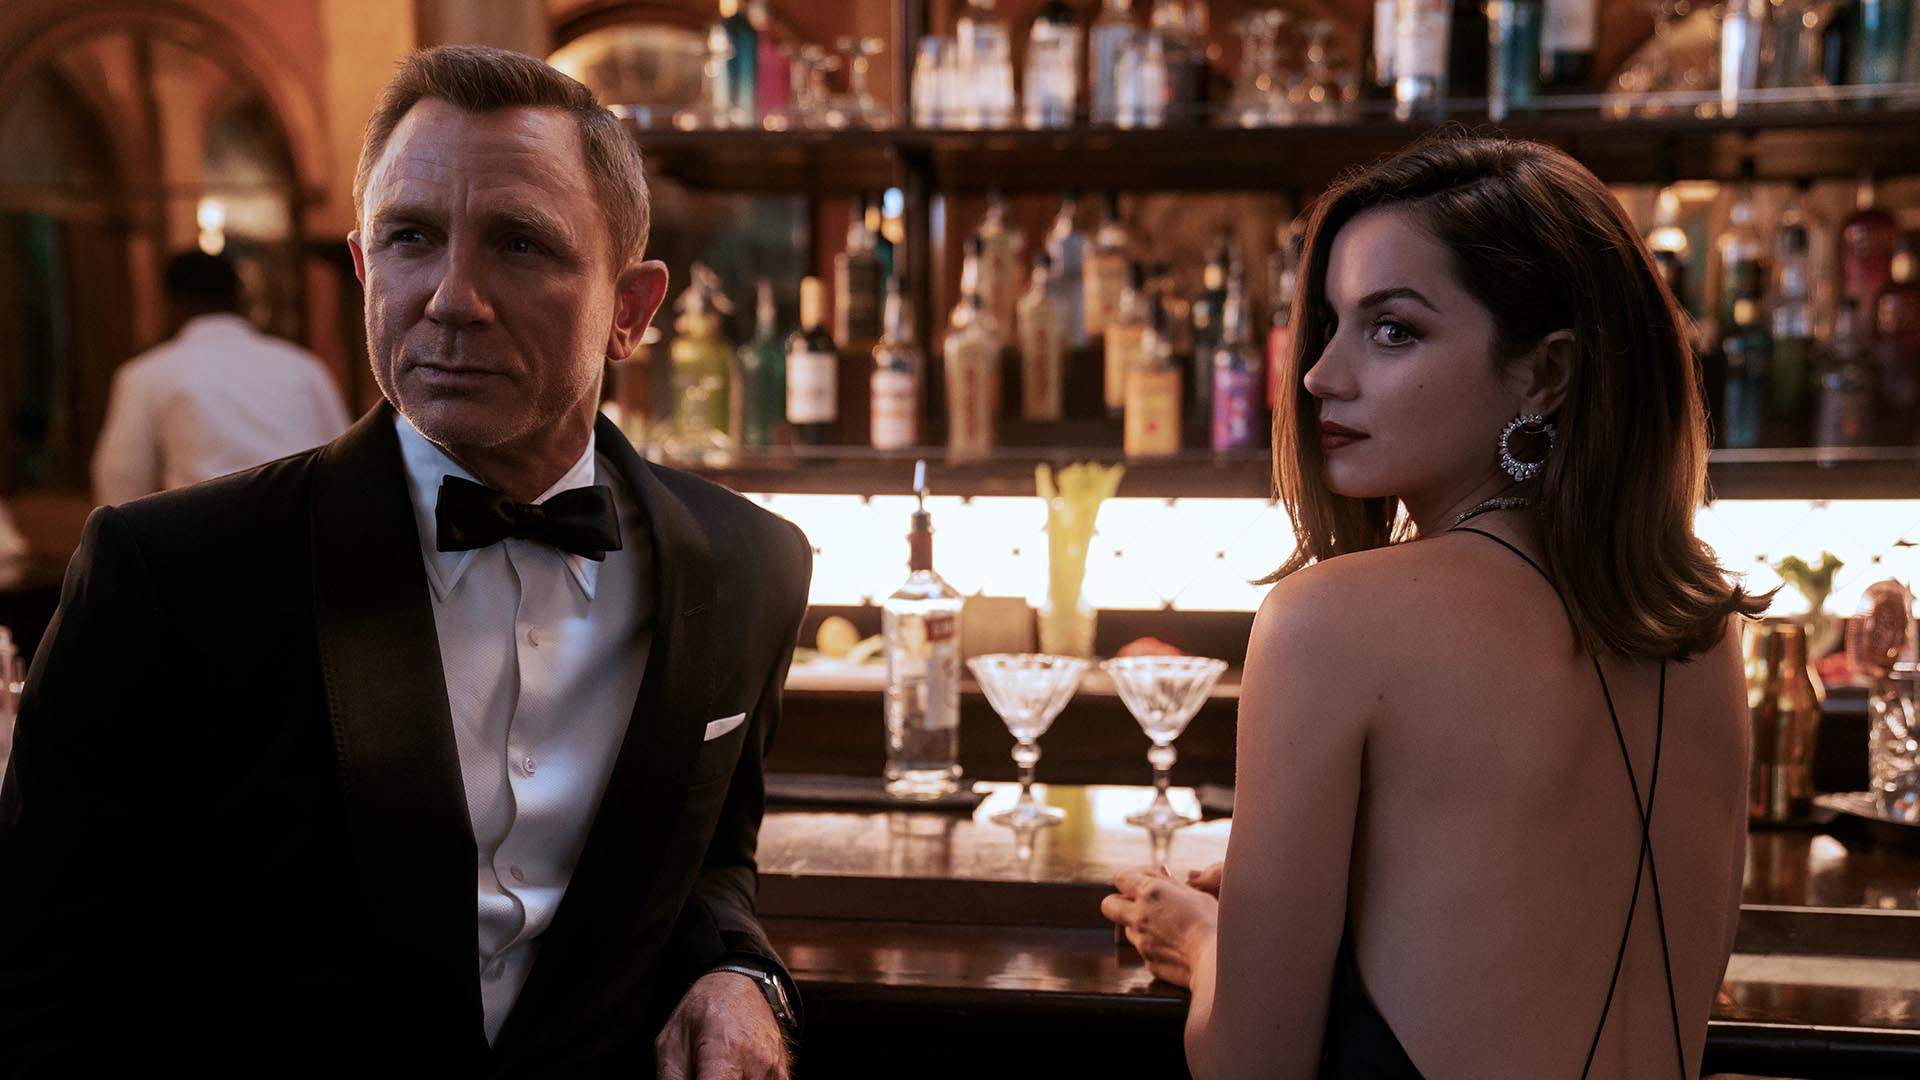 'No Time to Die' and Every Other 'Bond' Film Have Hit Prime Video to Shake (Not Stir) Your Next Binge